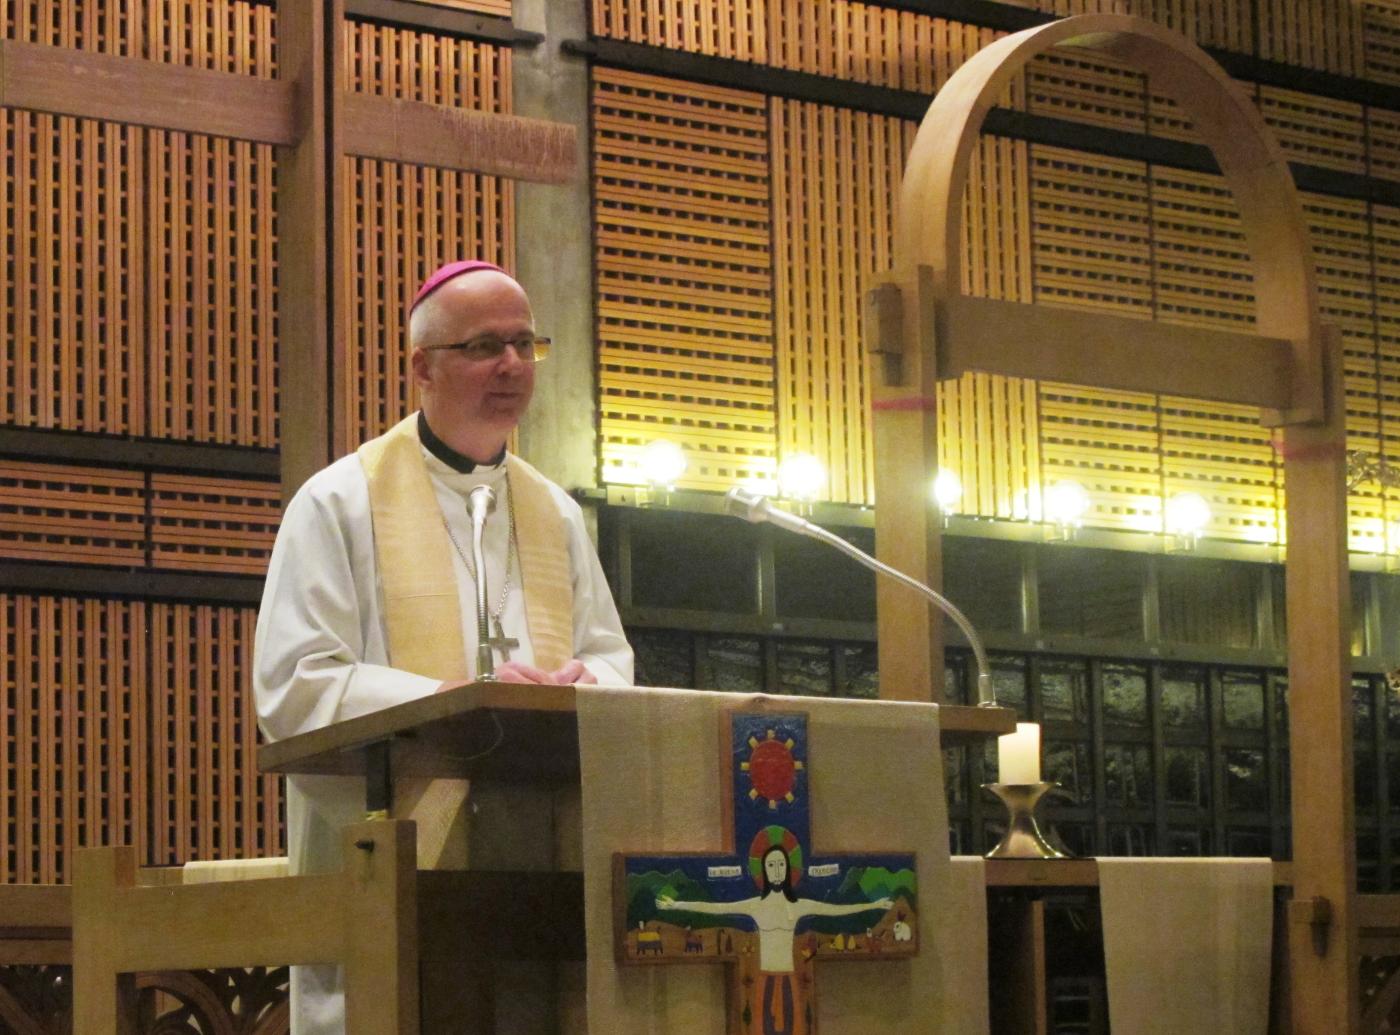 Bishop Charles Morerod preaching homily at the ecumenical celebration for the Week of Prayer for Christian Unity organized by the Christian Churches in Geneva at the Ecumenical Centre, Geneva.